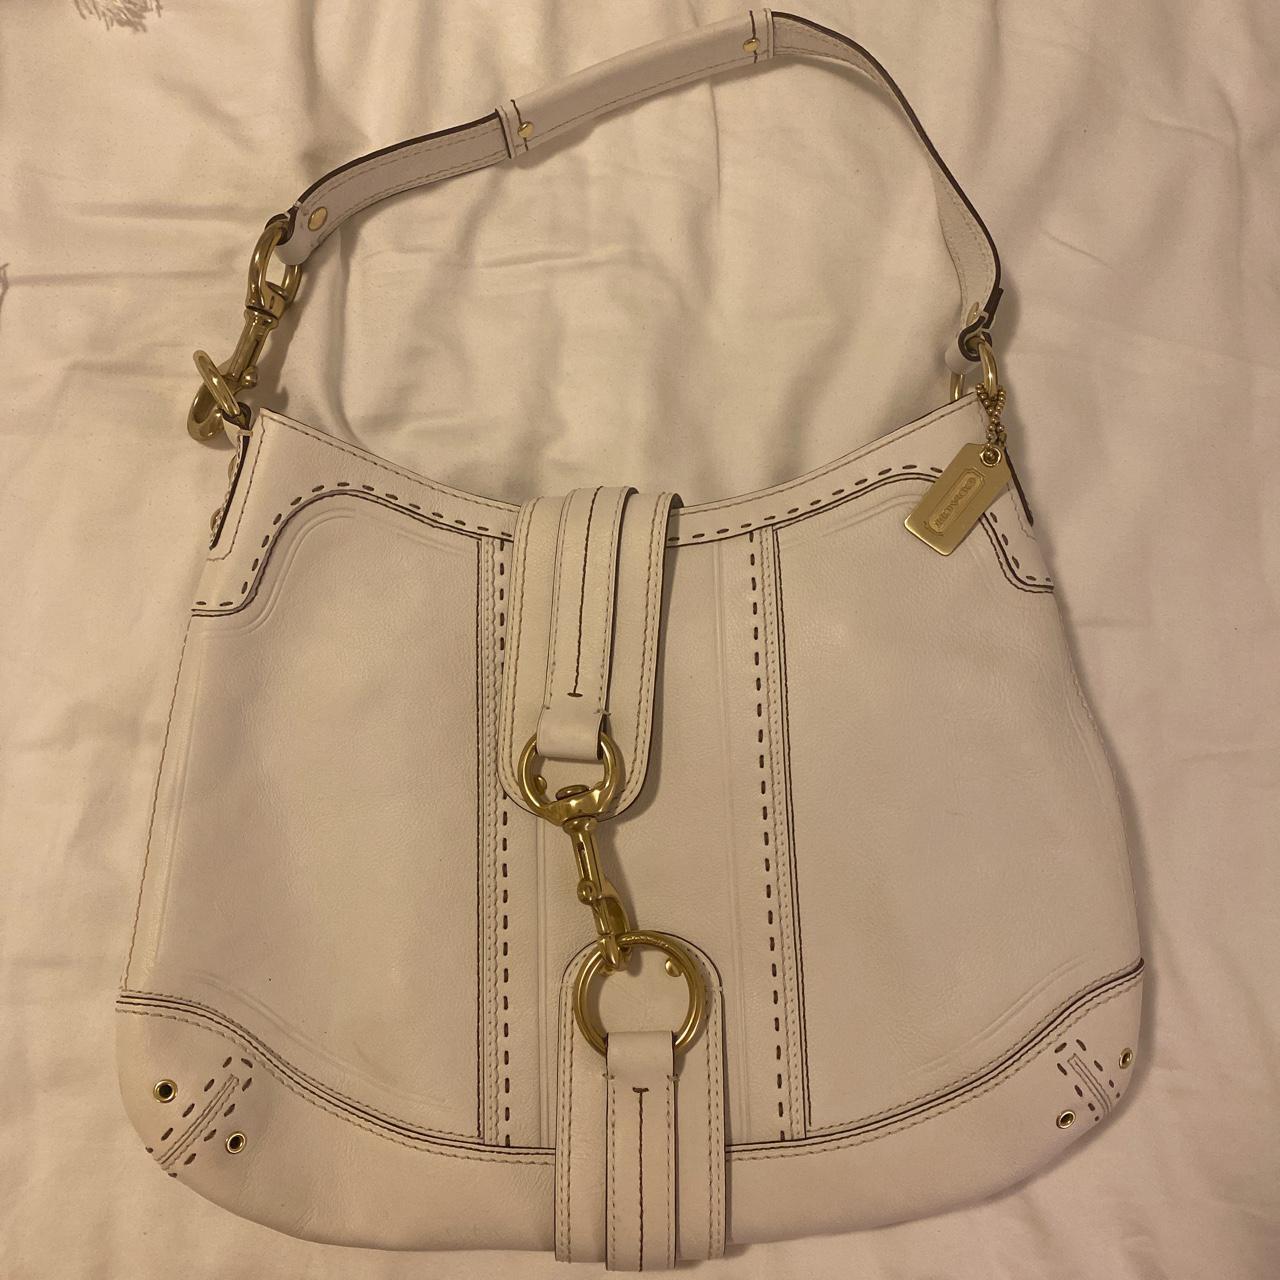 spotted one of our fave customers carrying this chic #Coach hobo